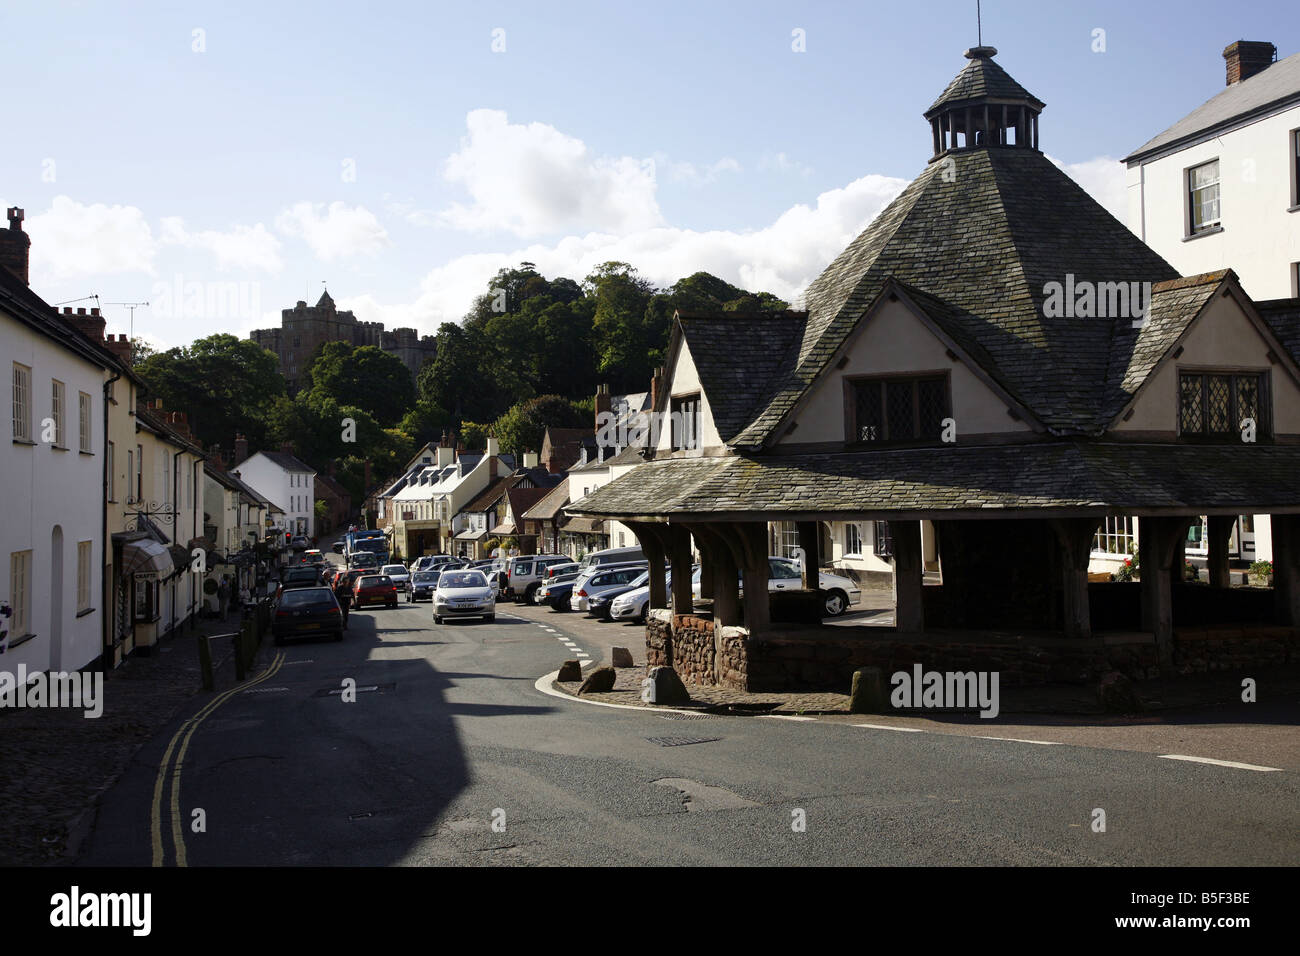 The ancient Yarn Market In the High Street of the village of Dunster near Minehead Stock Photo